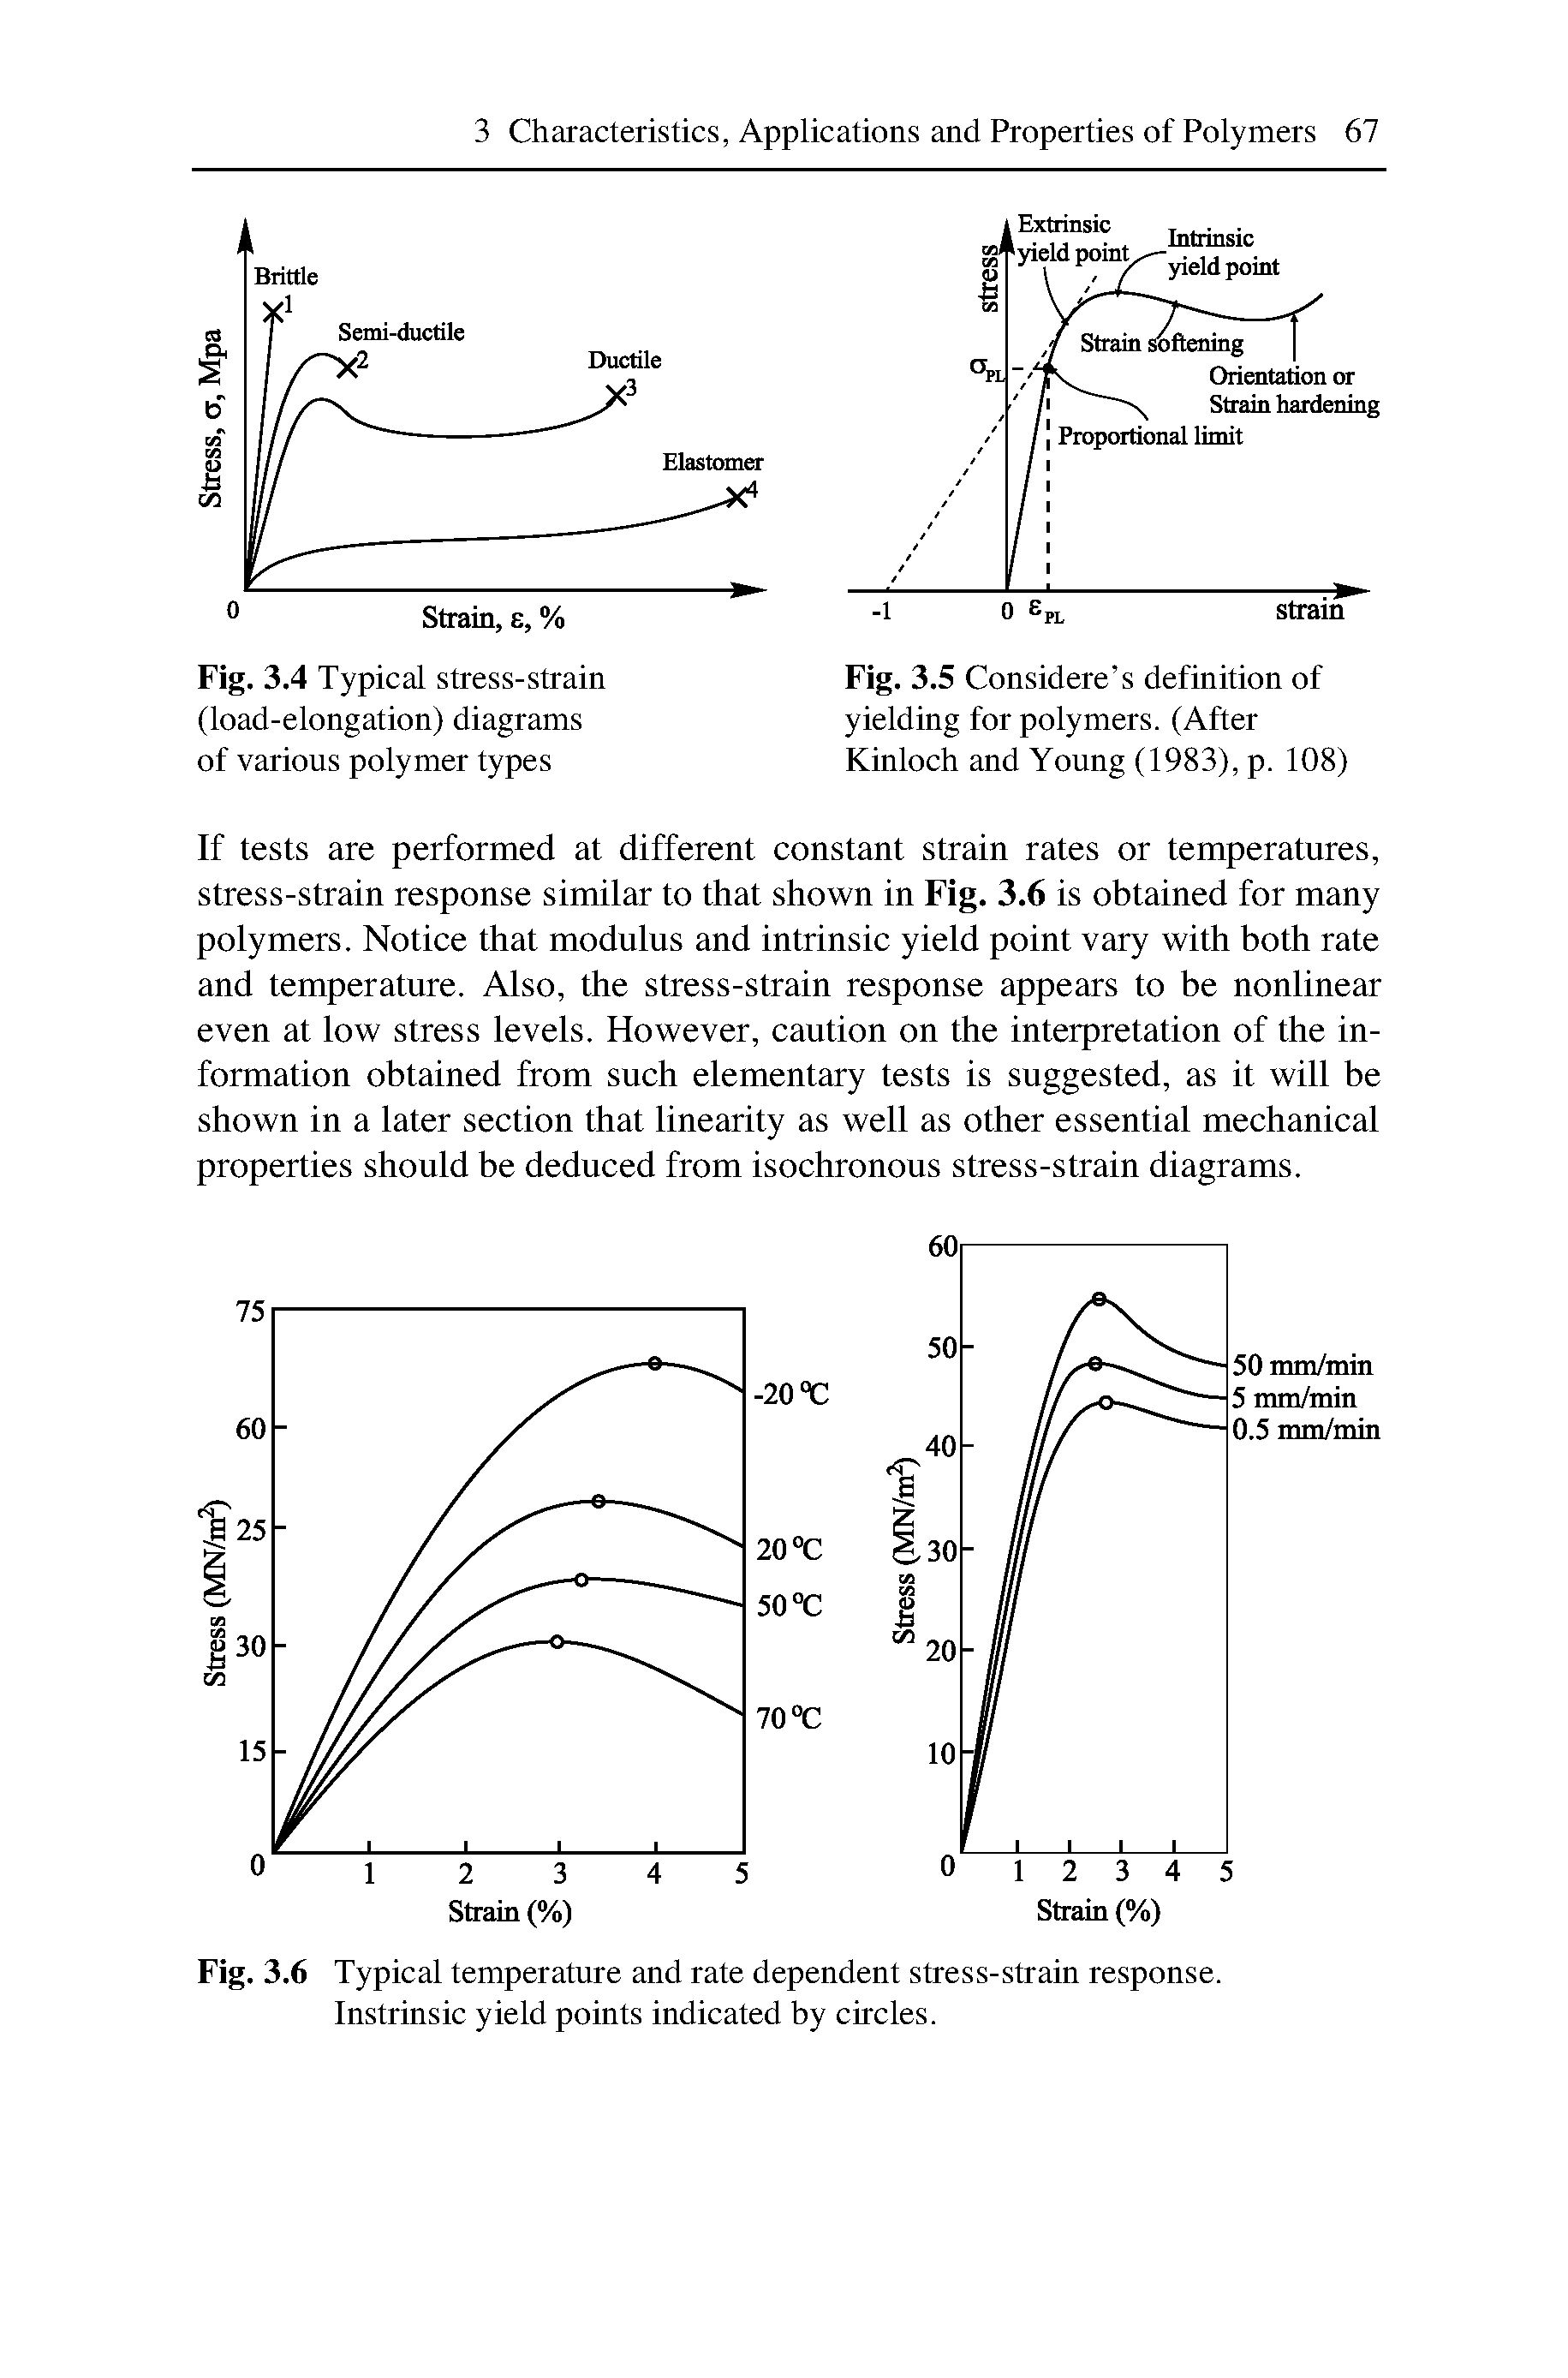 Fig. 3.5 Considere s definition of yielding for polymers. (After Kinloch and Young (1983), p. 108)...